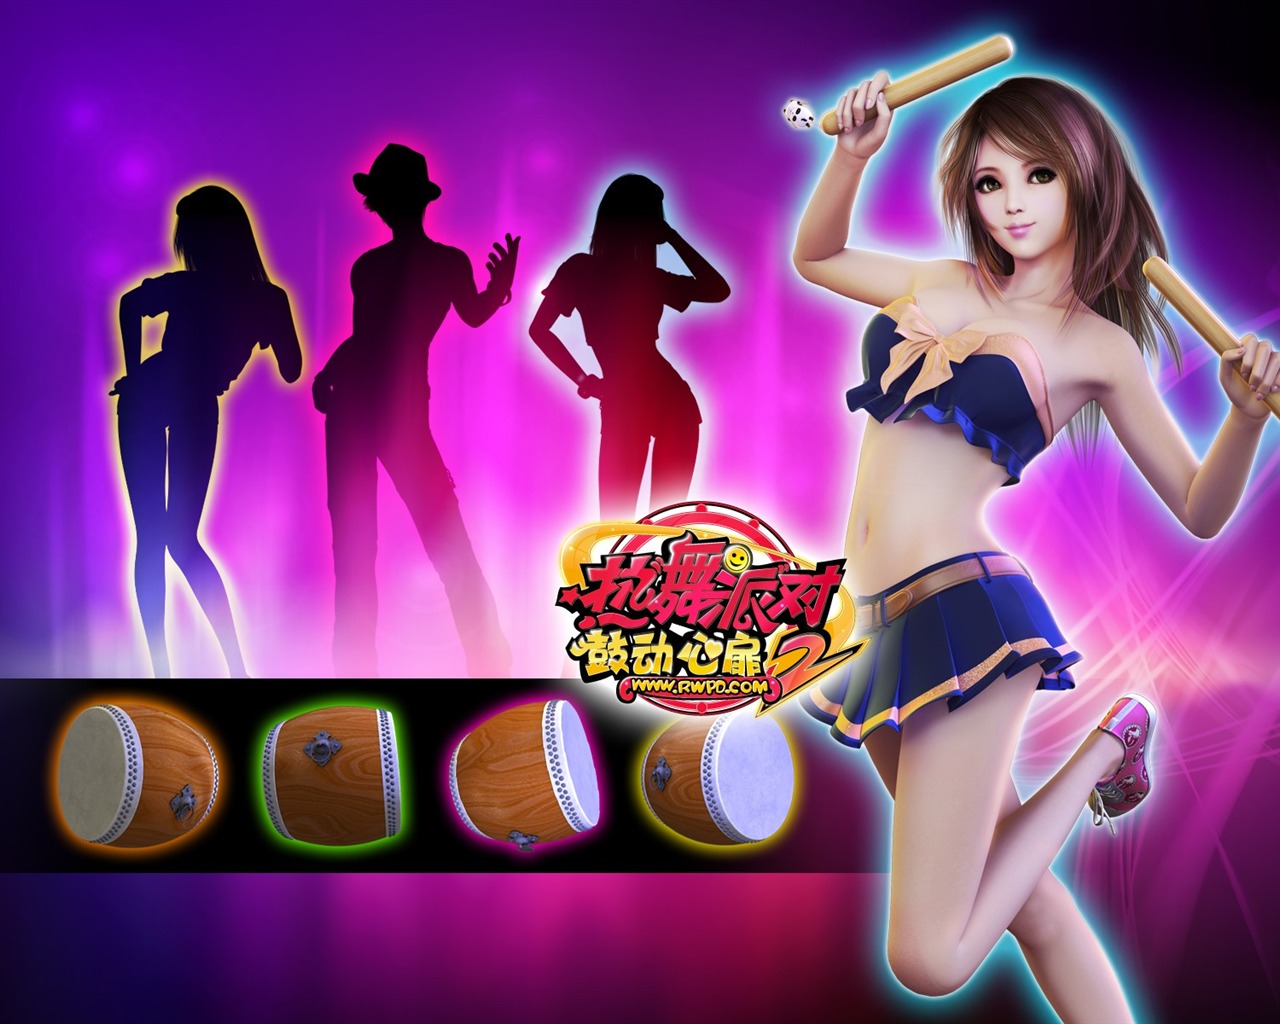 Online game Hot Dance Party II official wallpapers #15 - 1280x1024